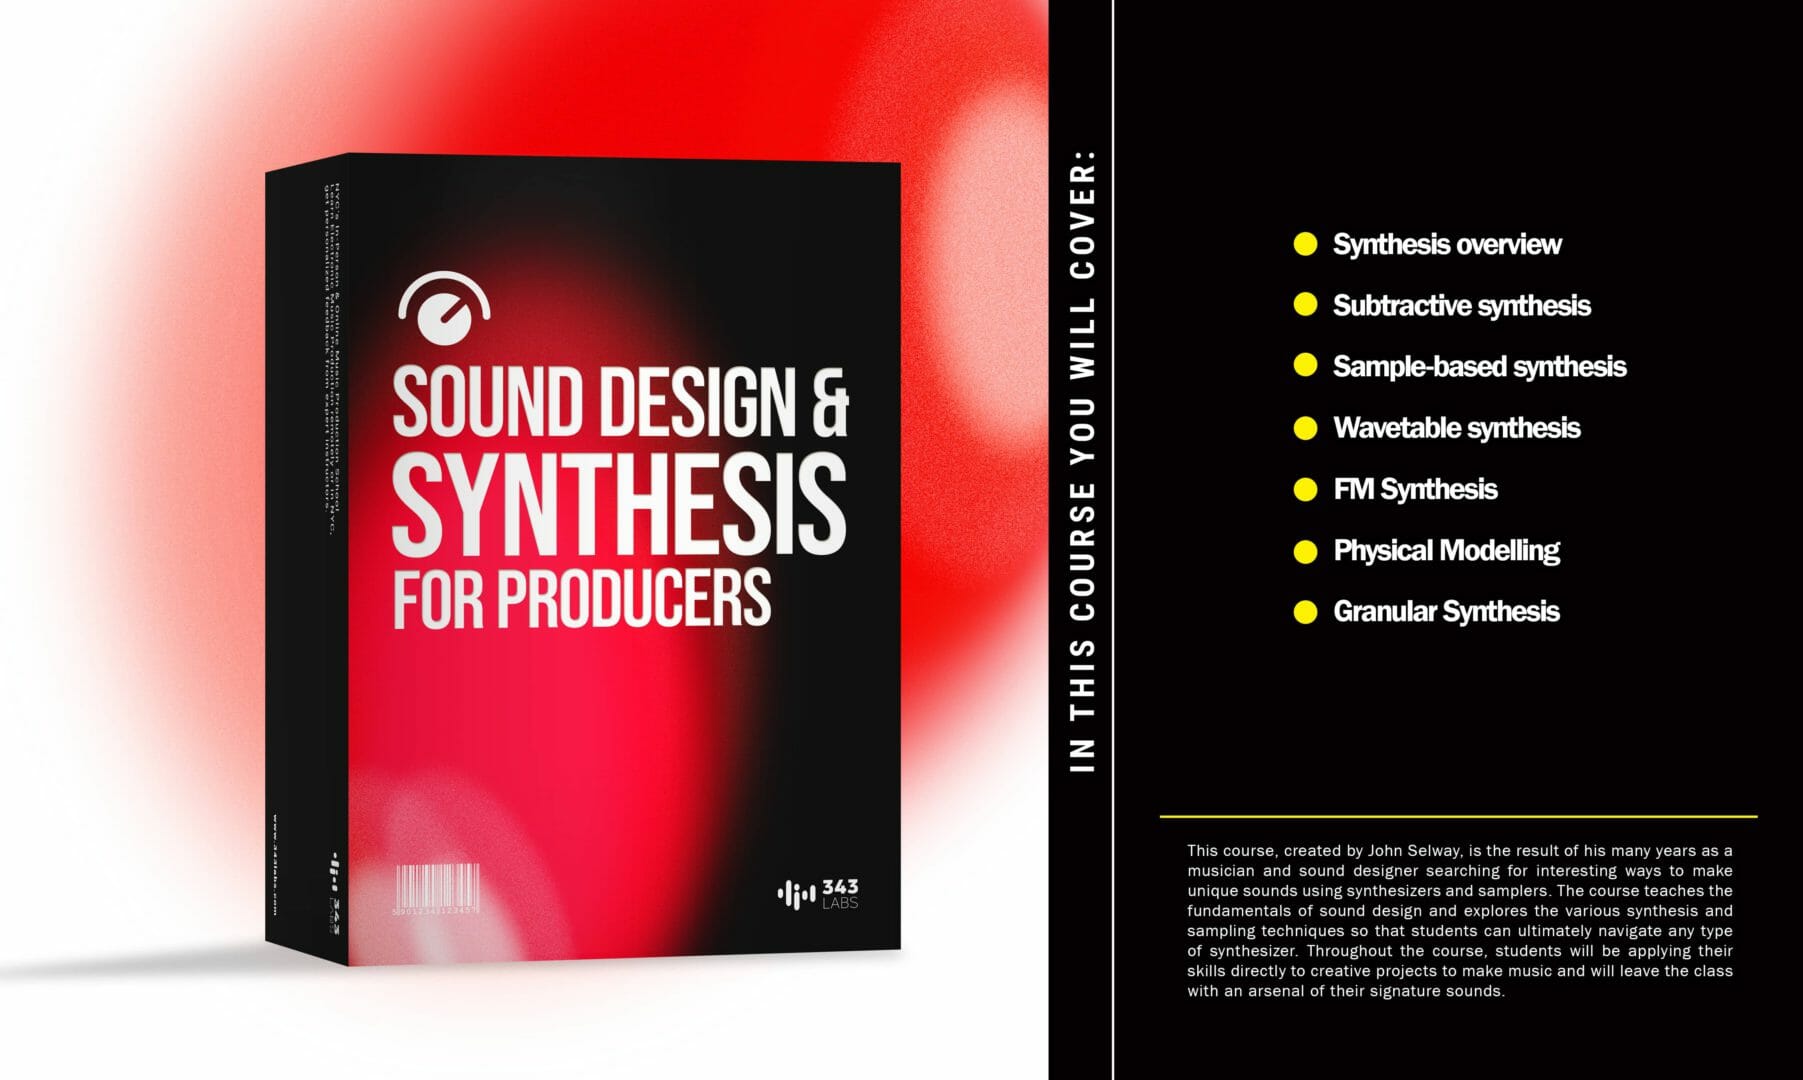 343LABS_class NYC Sound design and synthesis for producers